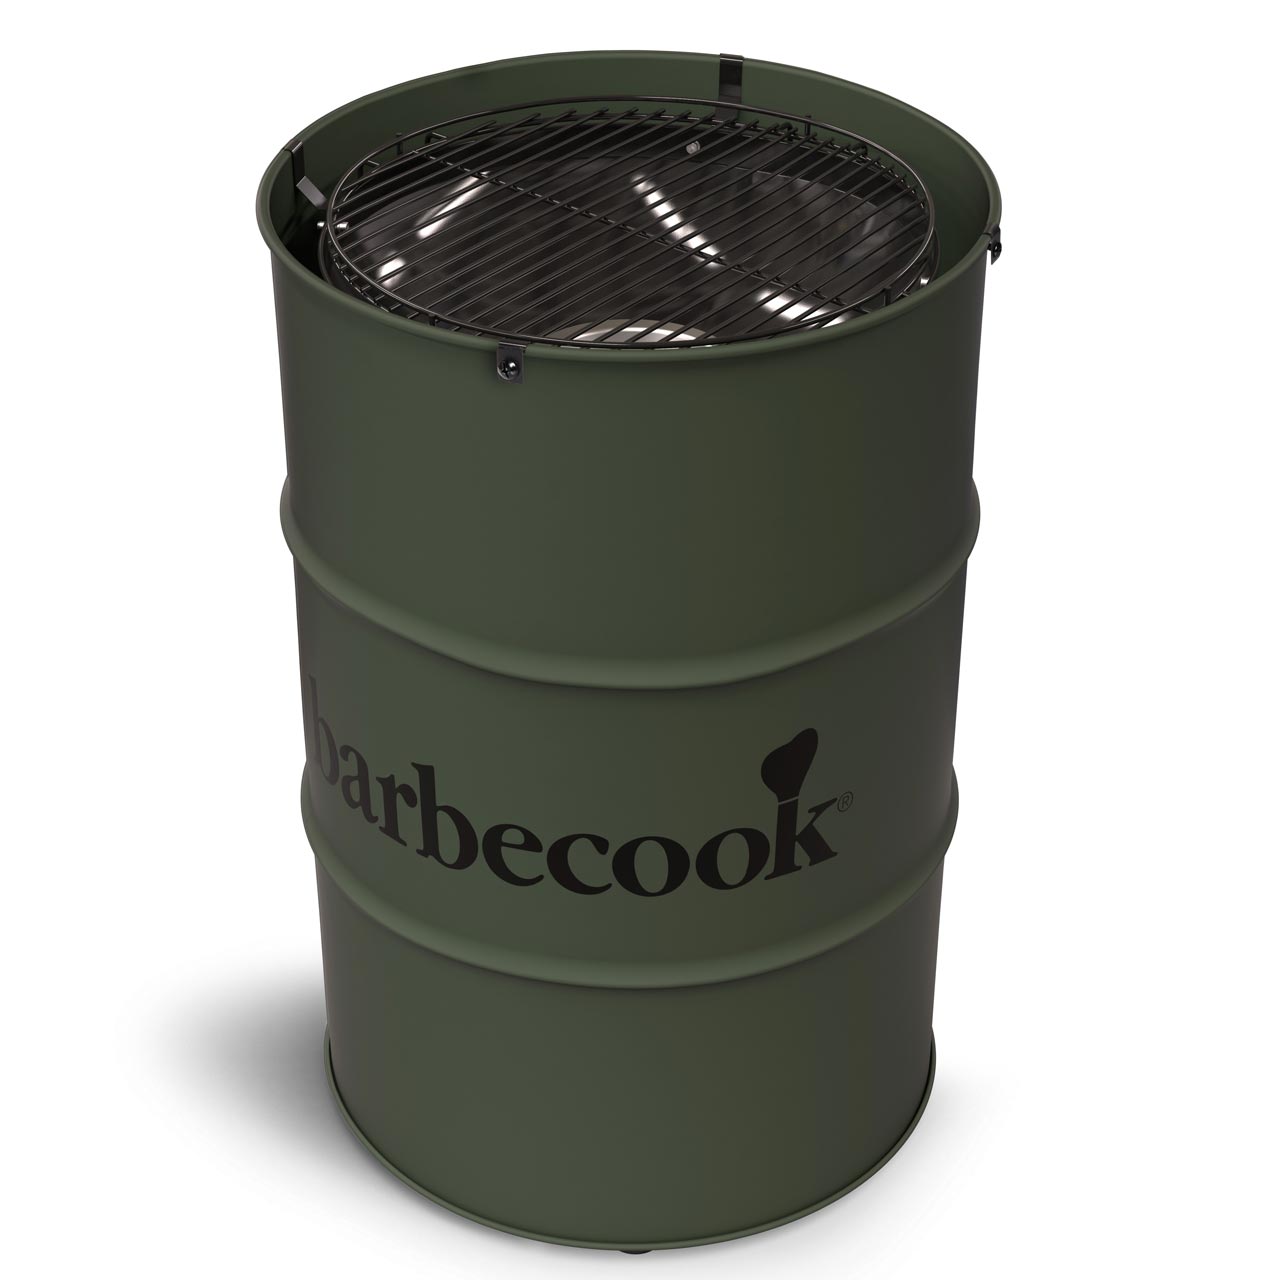 Barbecook Edson Army Green